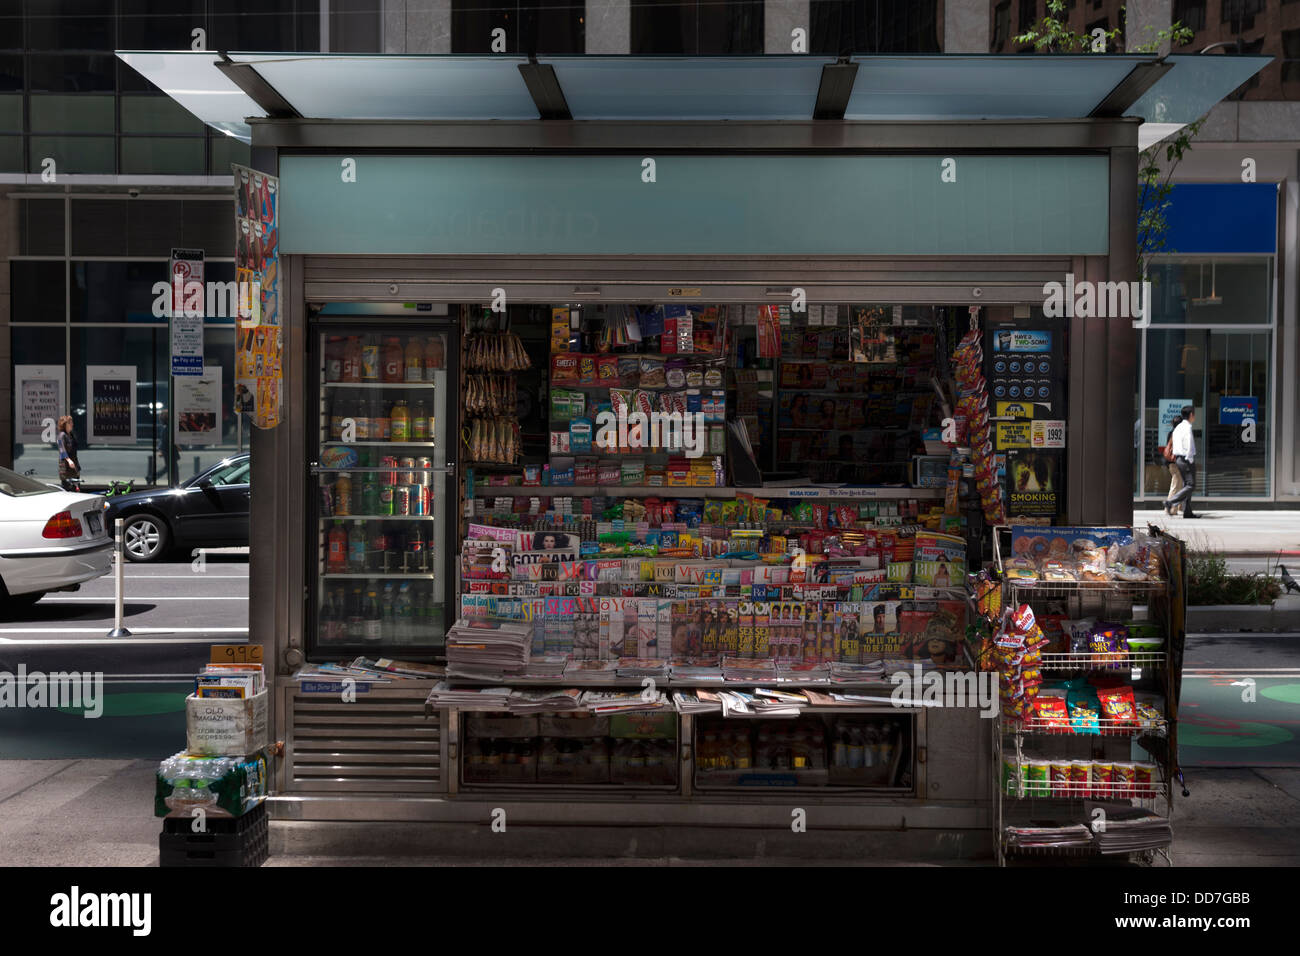 FRONT OF NEWS STAND SEVENTH AVENUE MIDTOWN MANHATTAN NEW YORK CITY USA Stock Photo